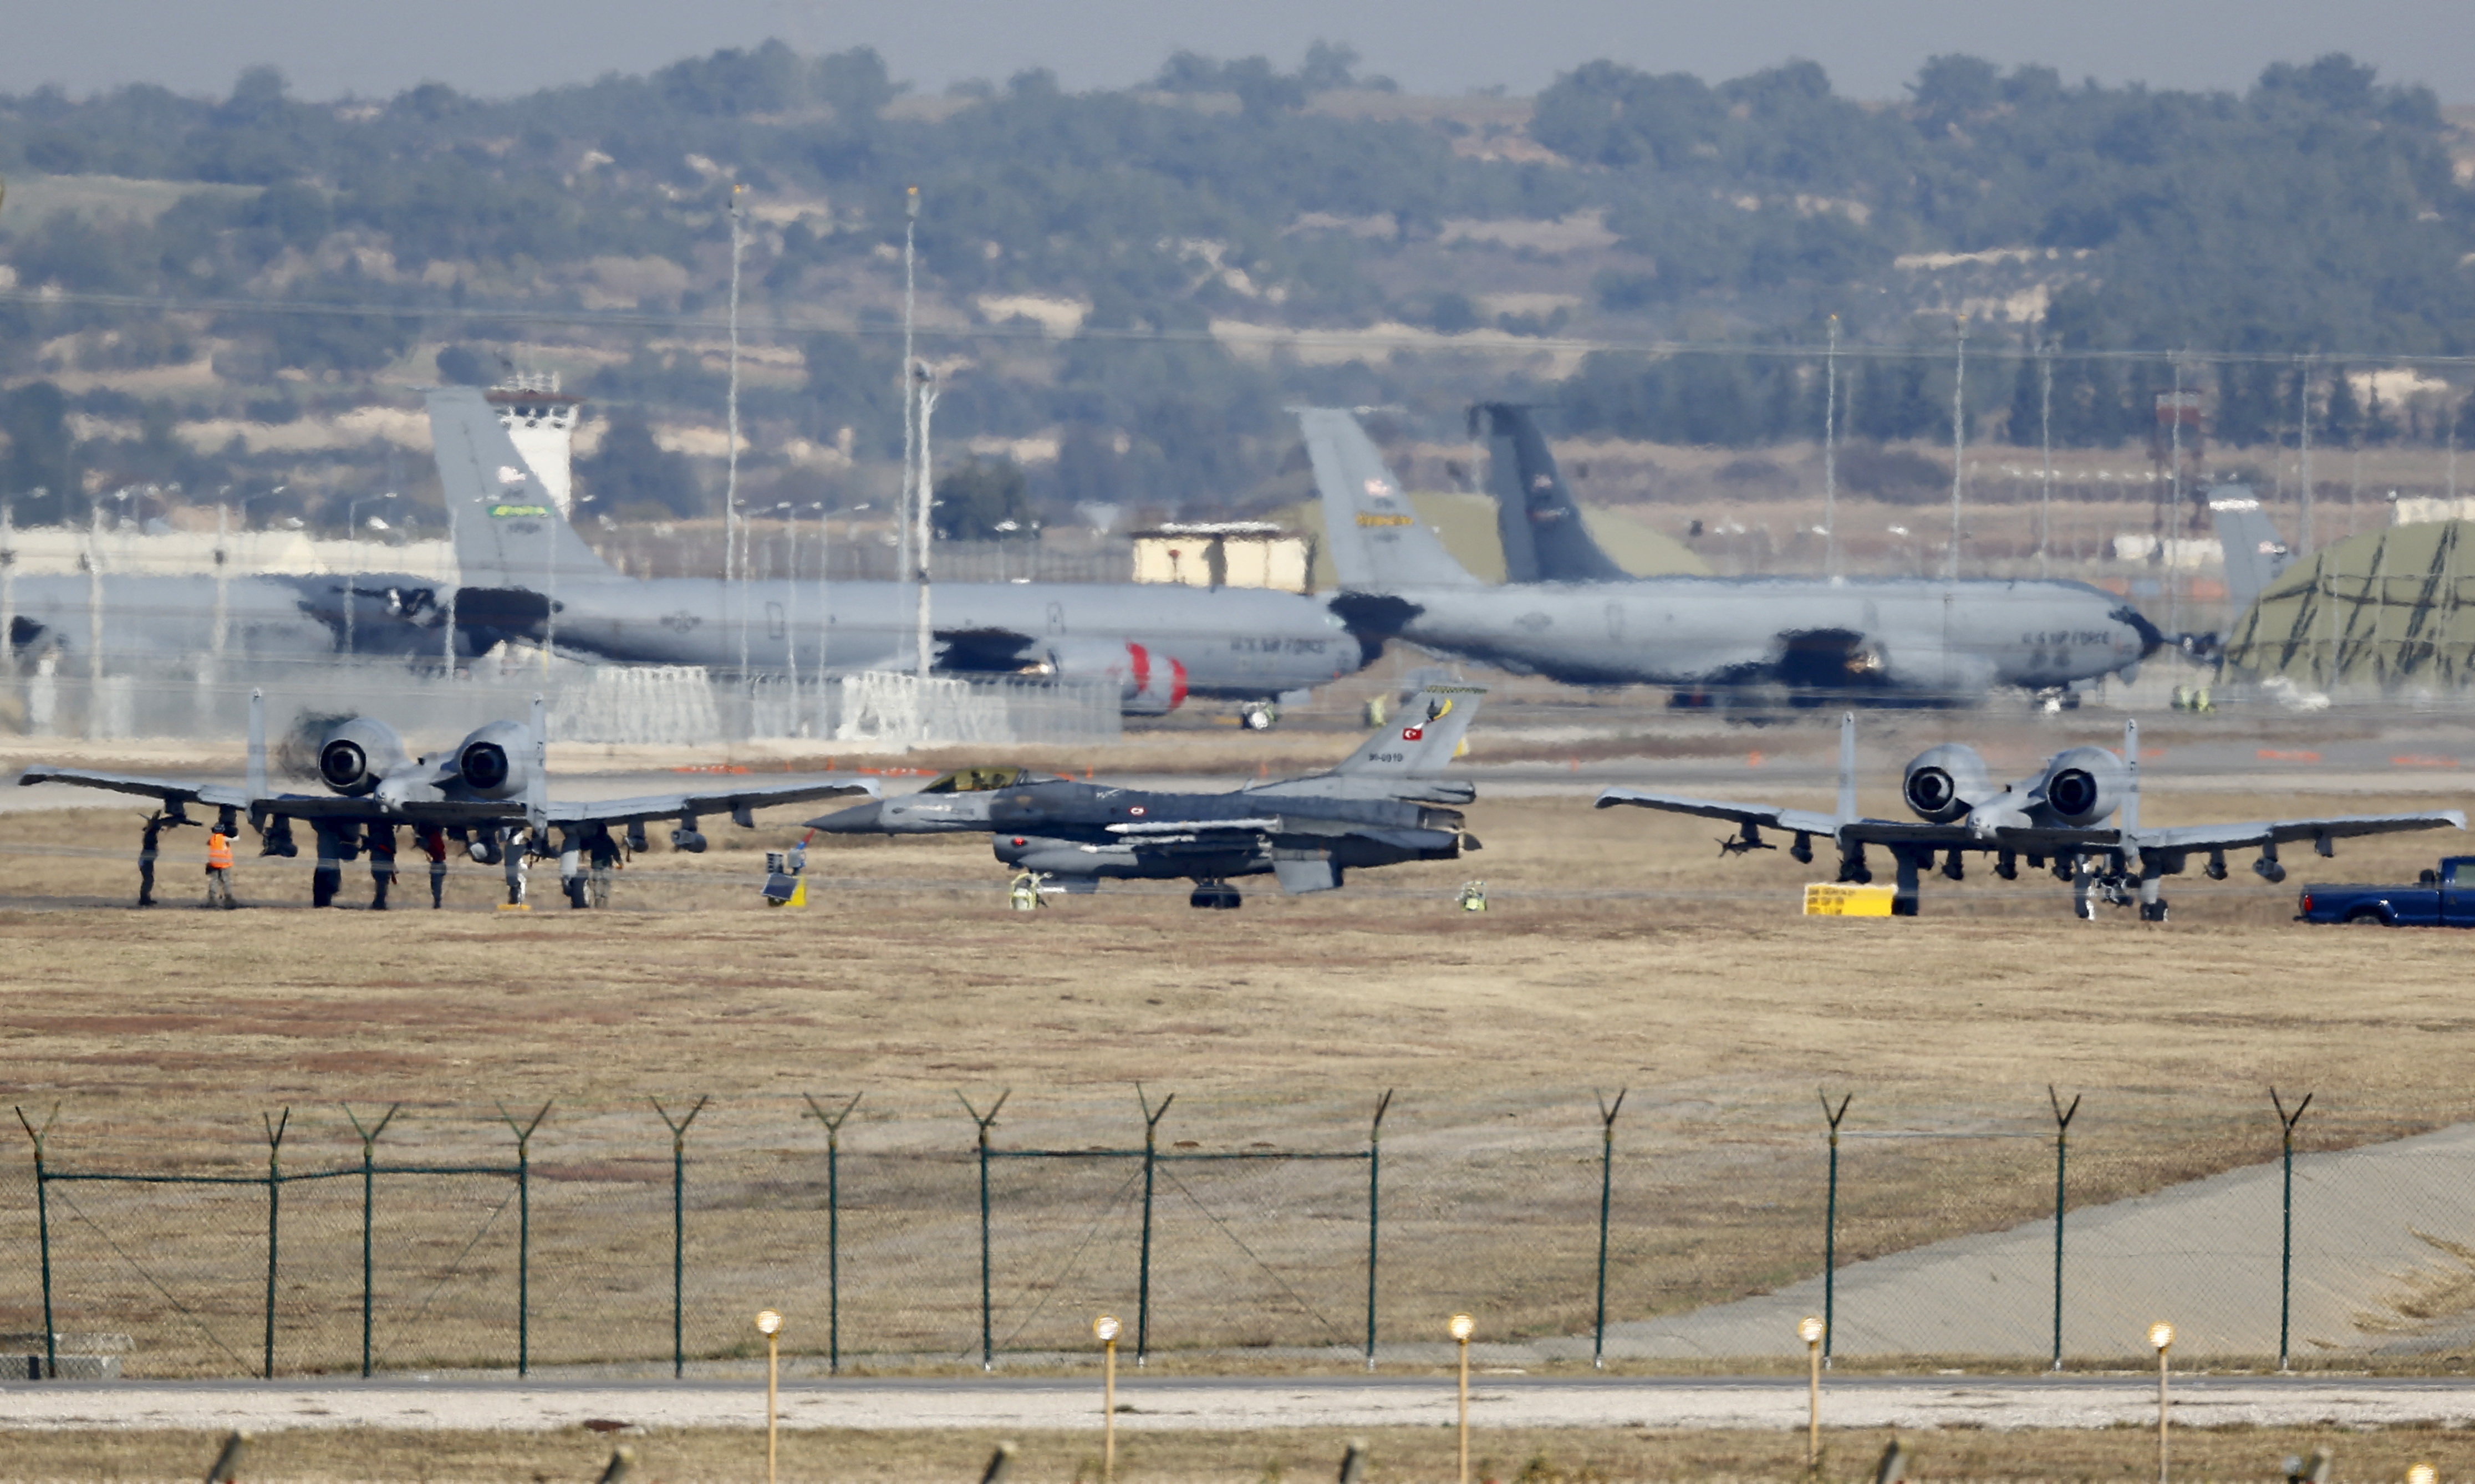 A Turkish Air Force F-16 fighter jet is seen between U.S. Air Force A-10 Thunderbolt II fighter jets at Incirlik airbase in Adana, Turkey